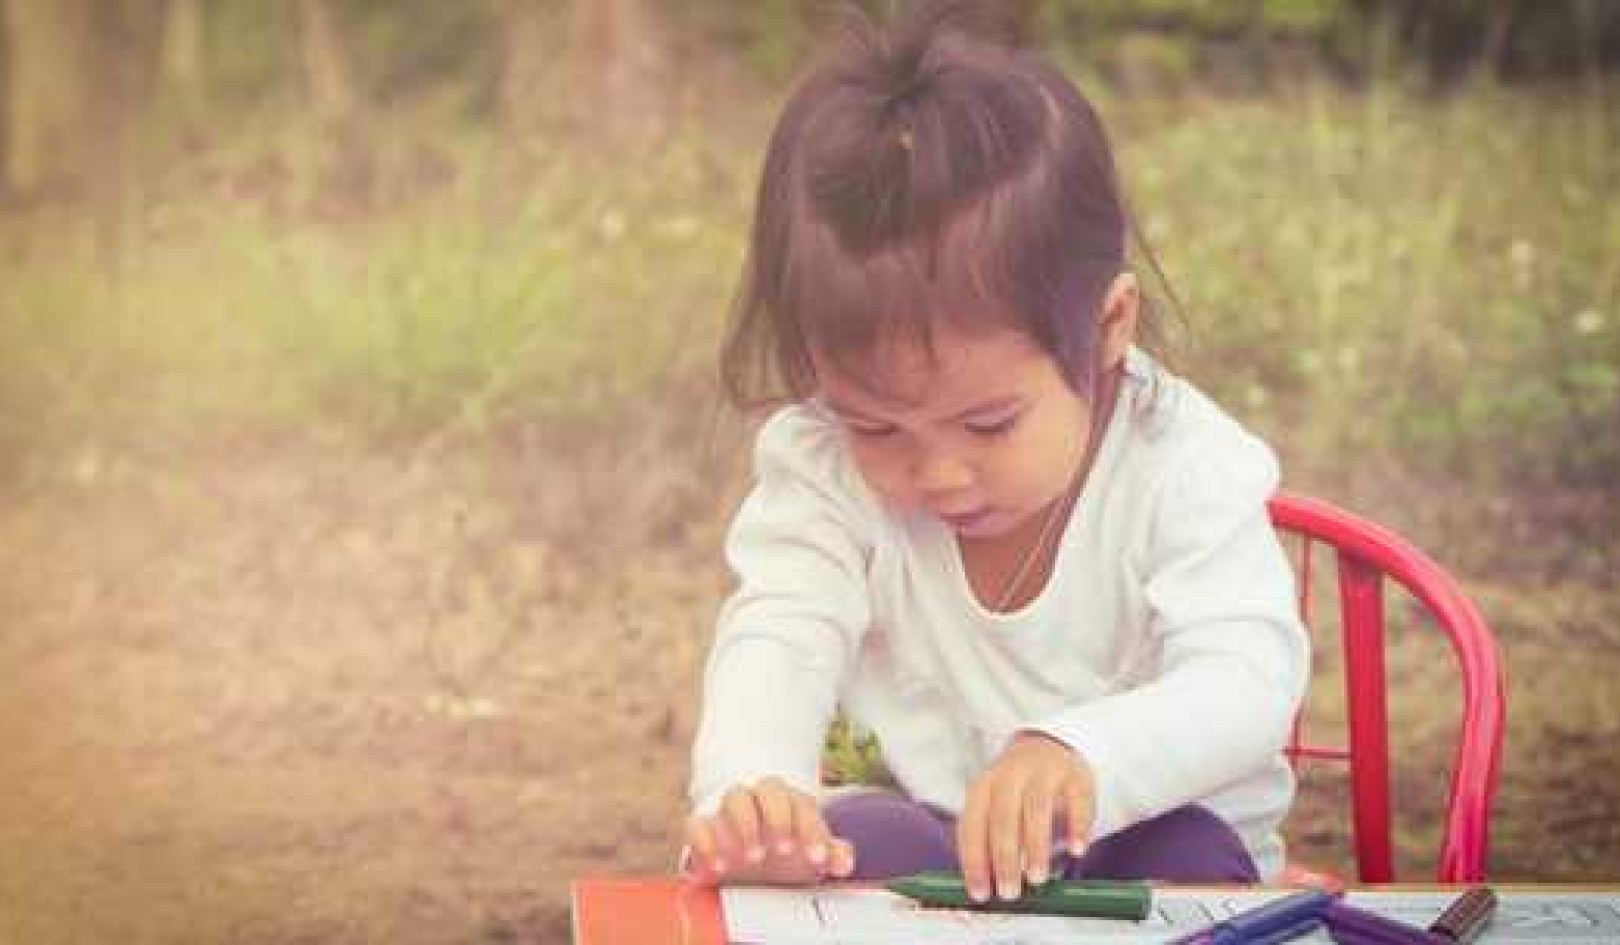 Writing And Reading Starts With Children's Hands-on Play